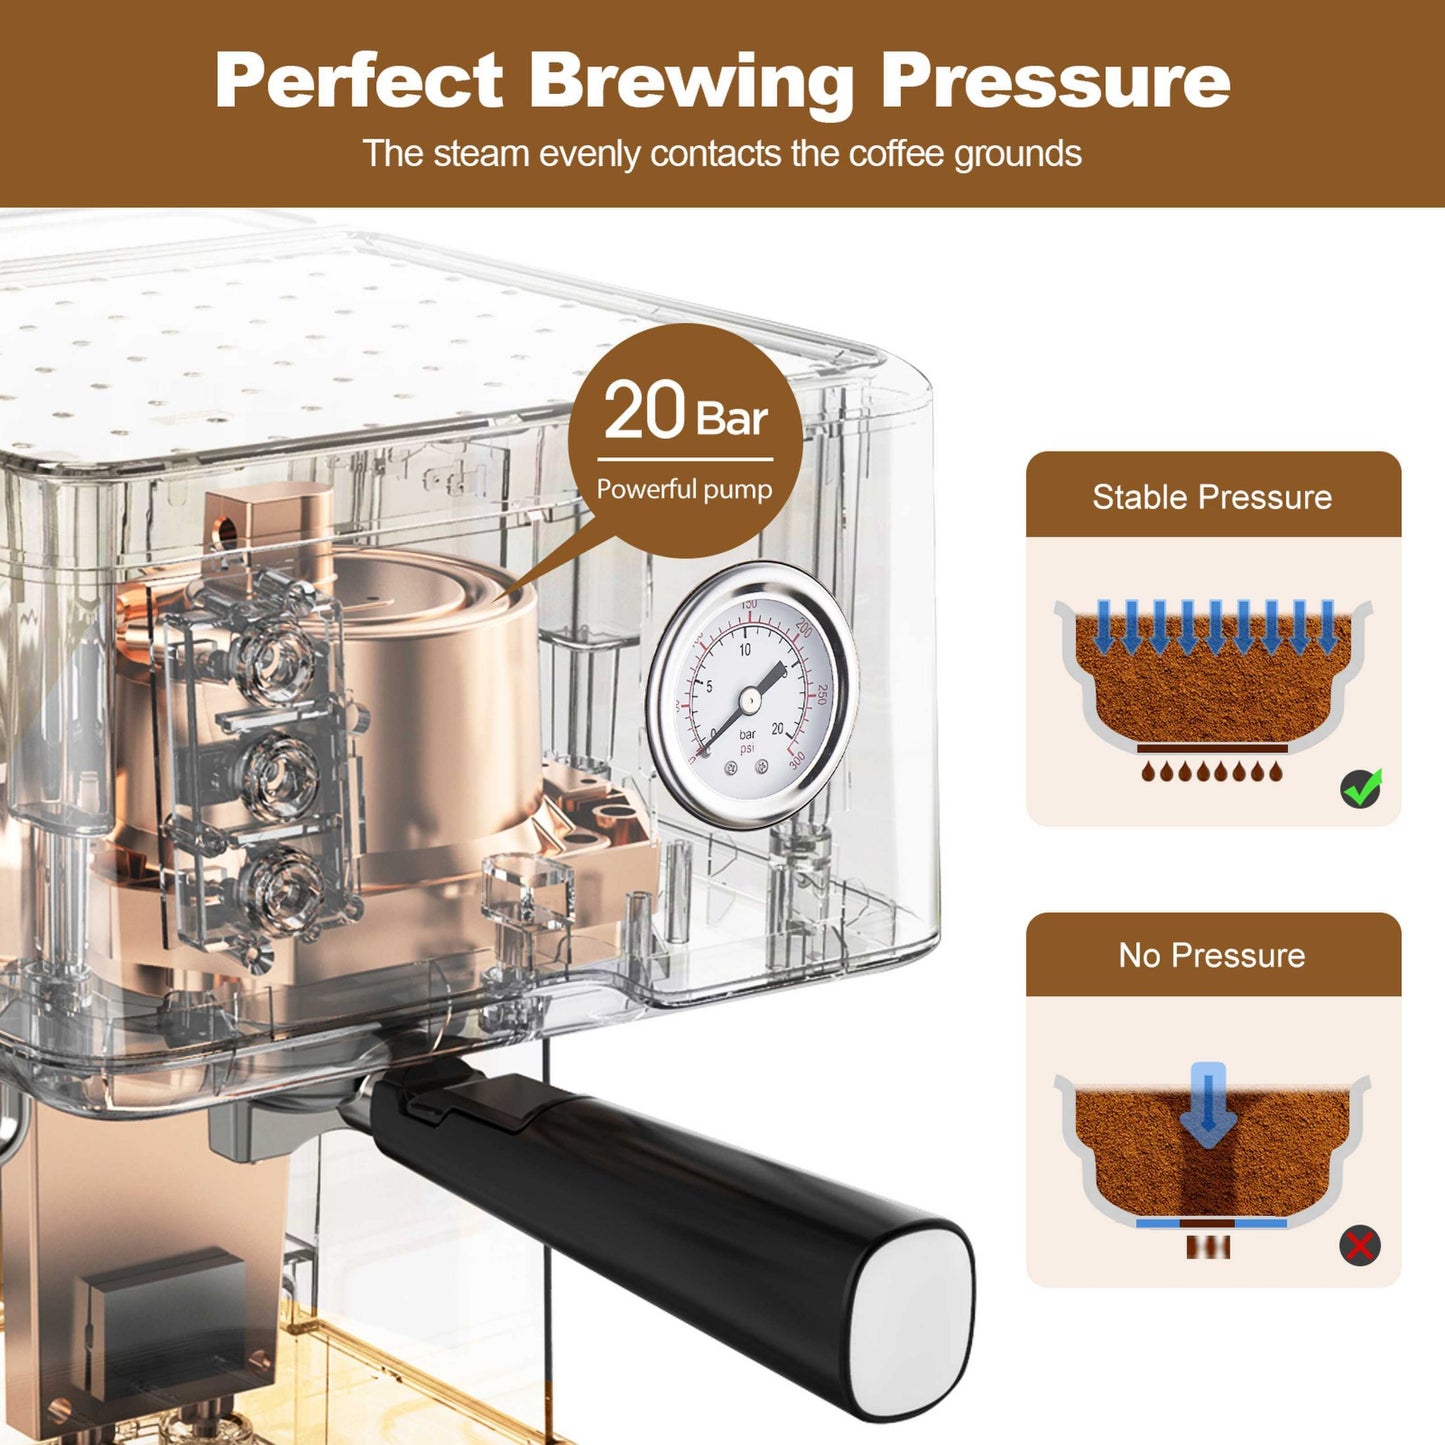 Espresso Machine 20 Bar Pump Pressure Cappuccino Latte Maker Coffee Machine With ESE POD Filter&Milk Frother Steam Wand&thermometer, 1.5L Water Tank, Stainless Steel Espresso Ban On Amazon